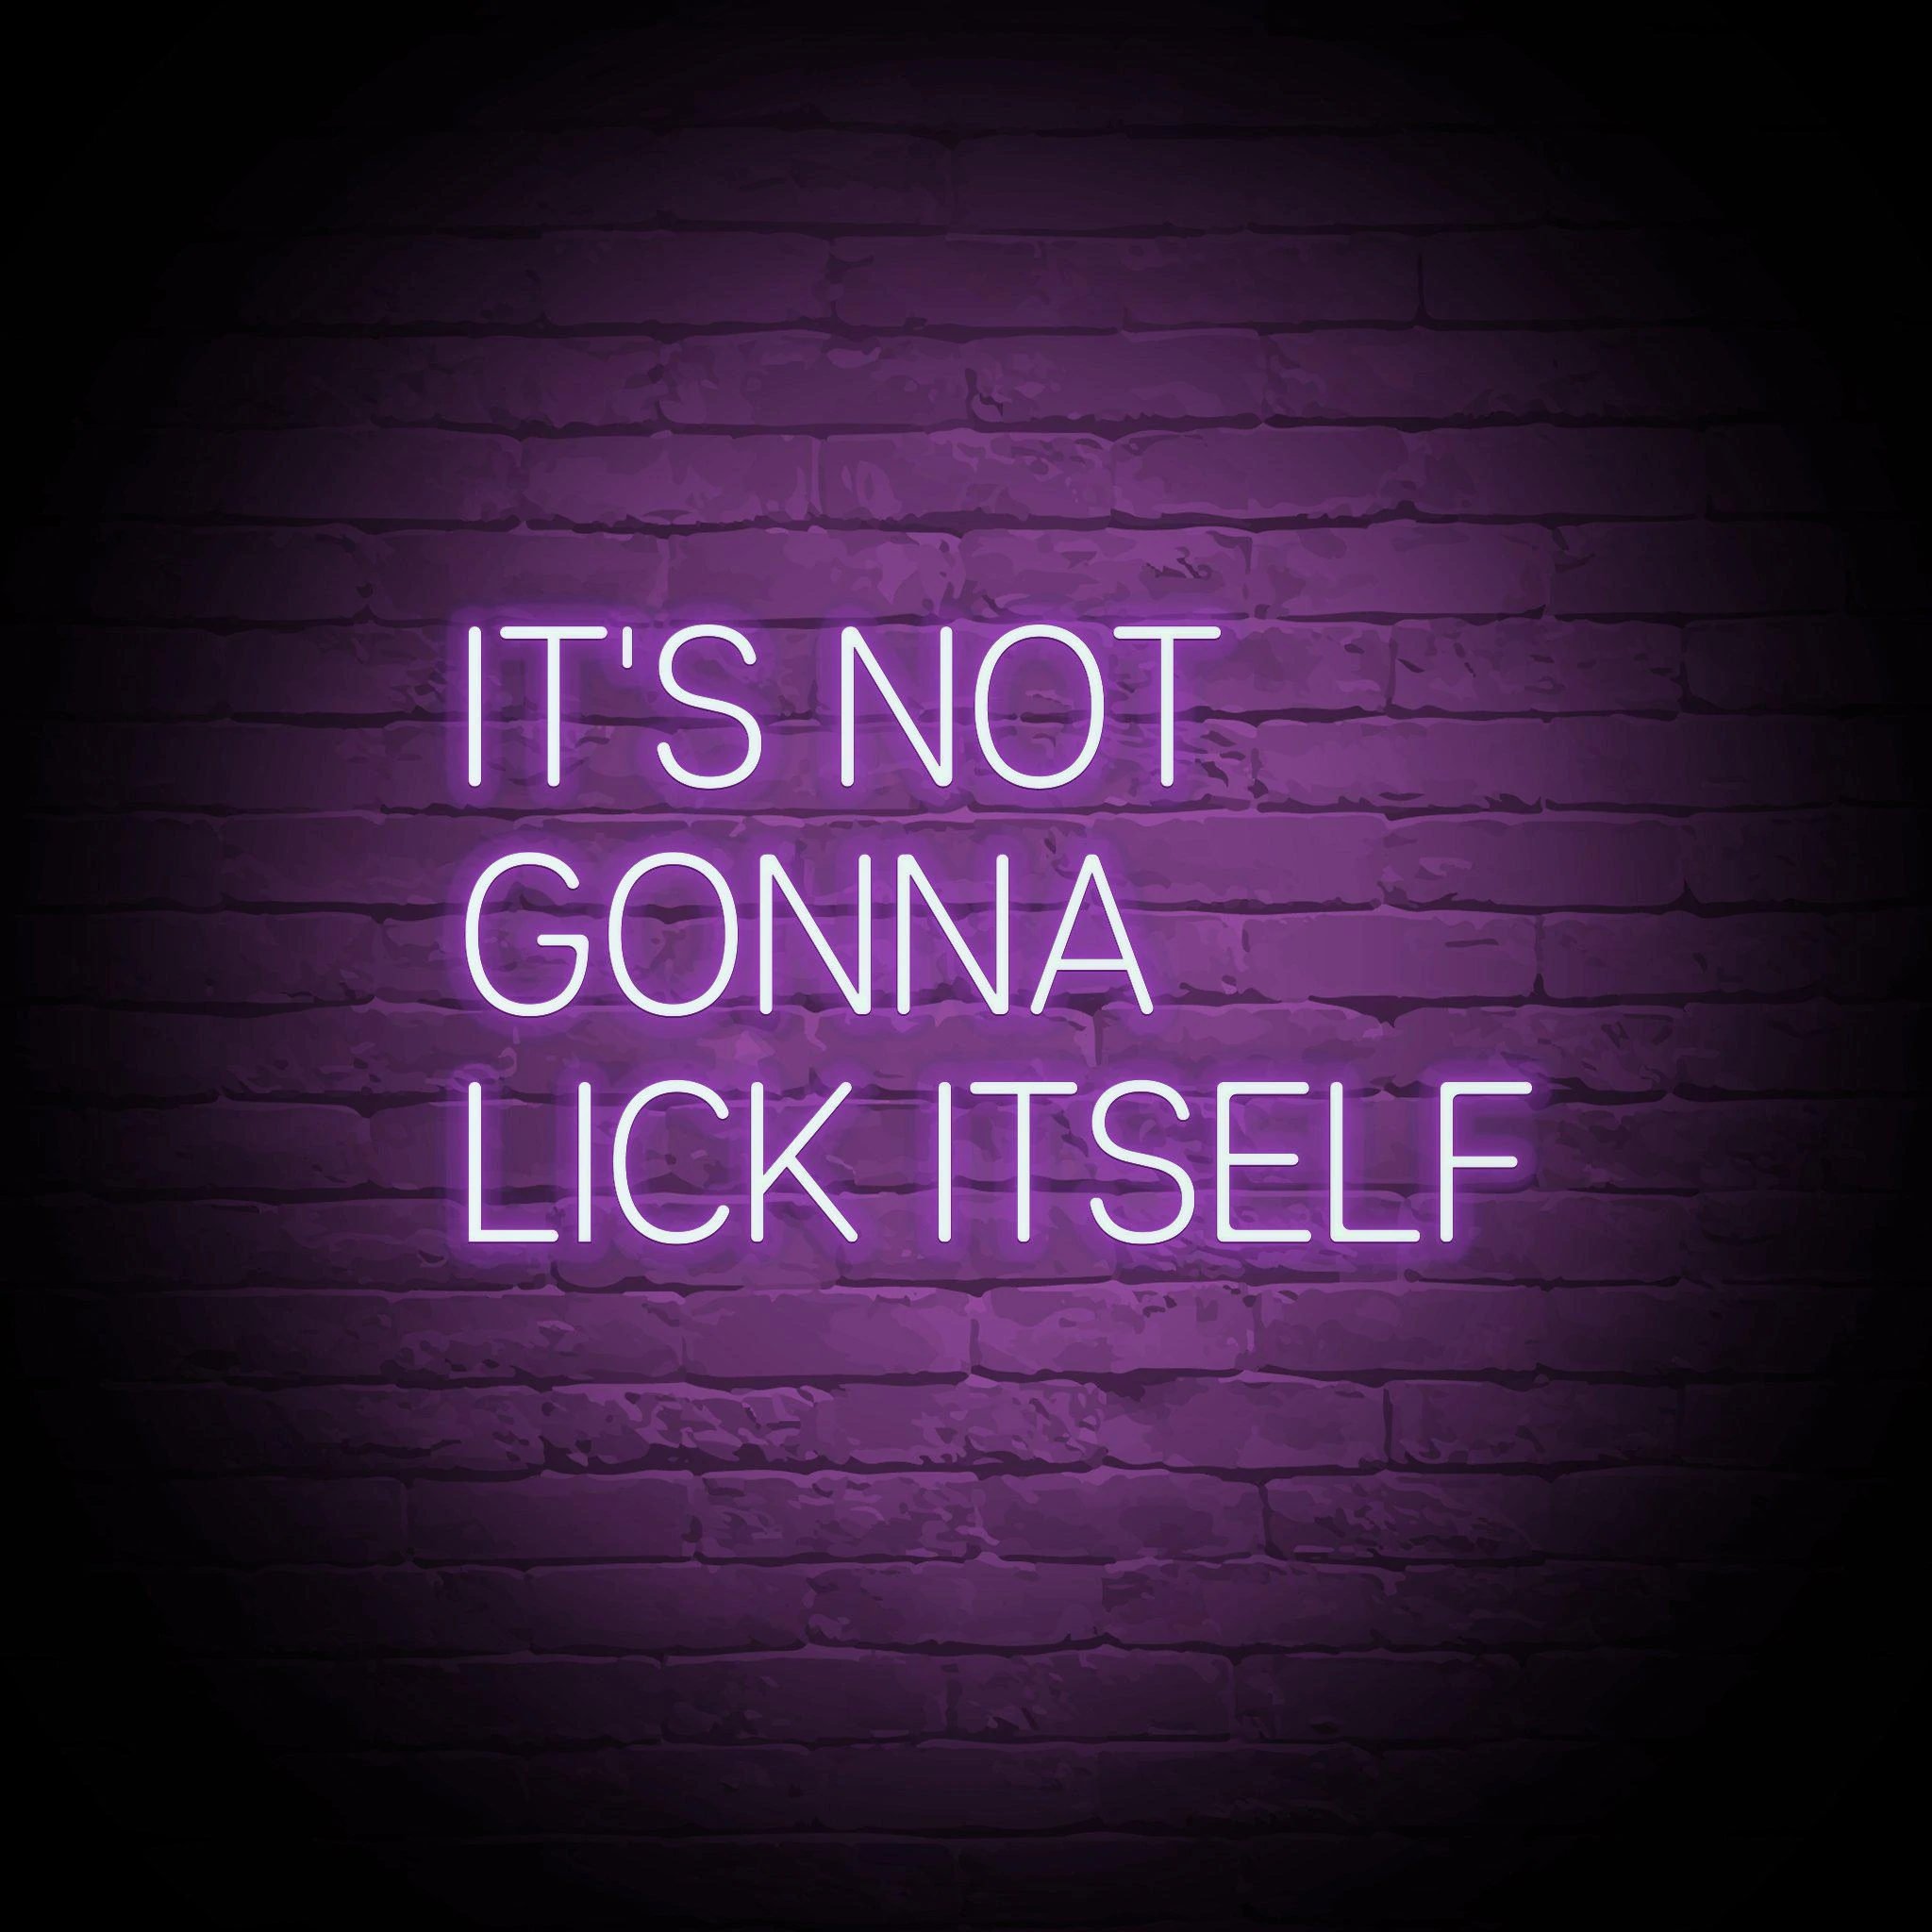 'IT'S NOT GONNA LICK ITSELF' NEON SIGN